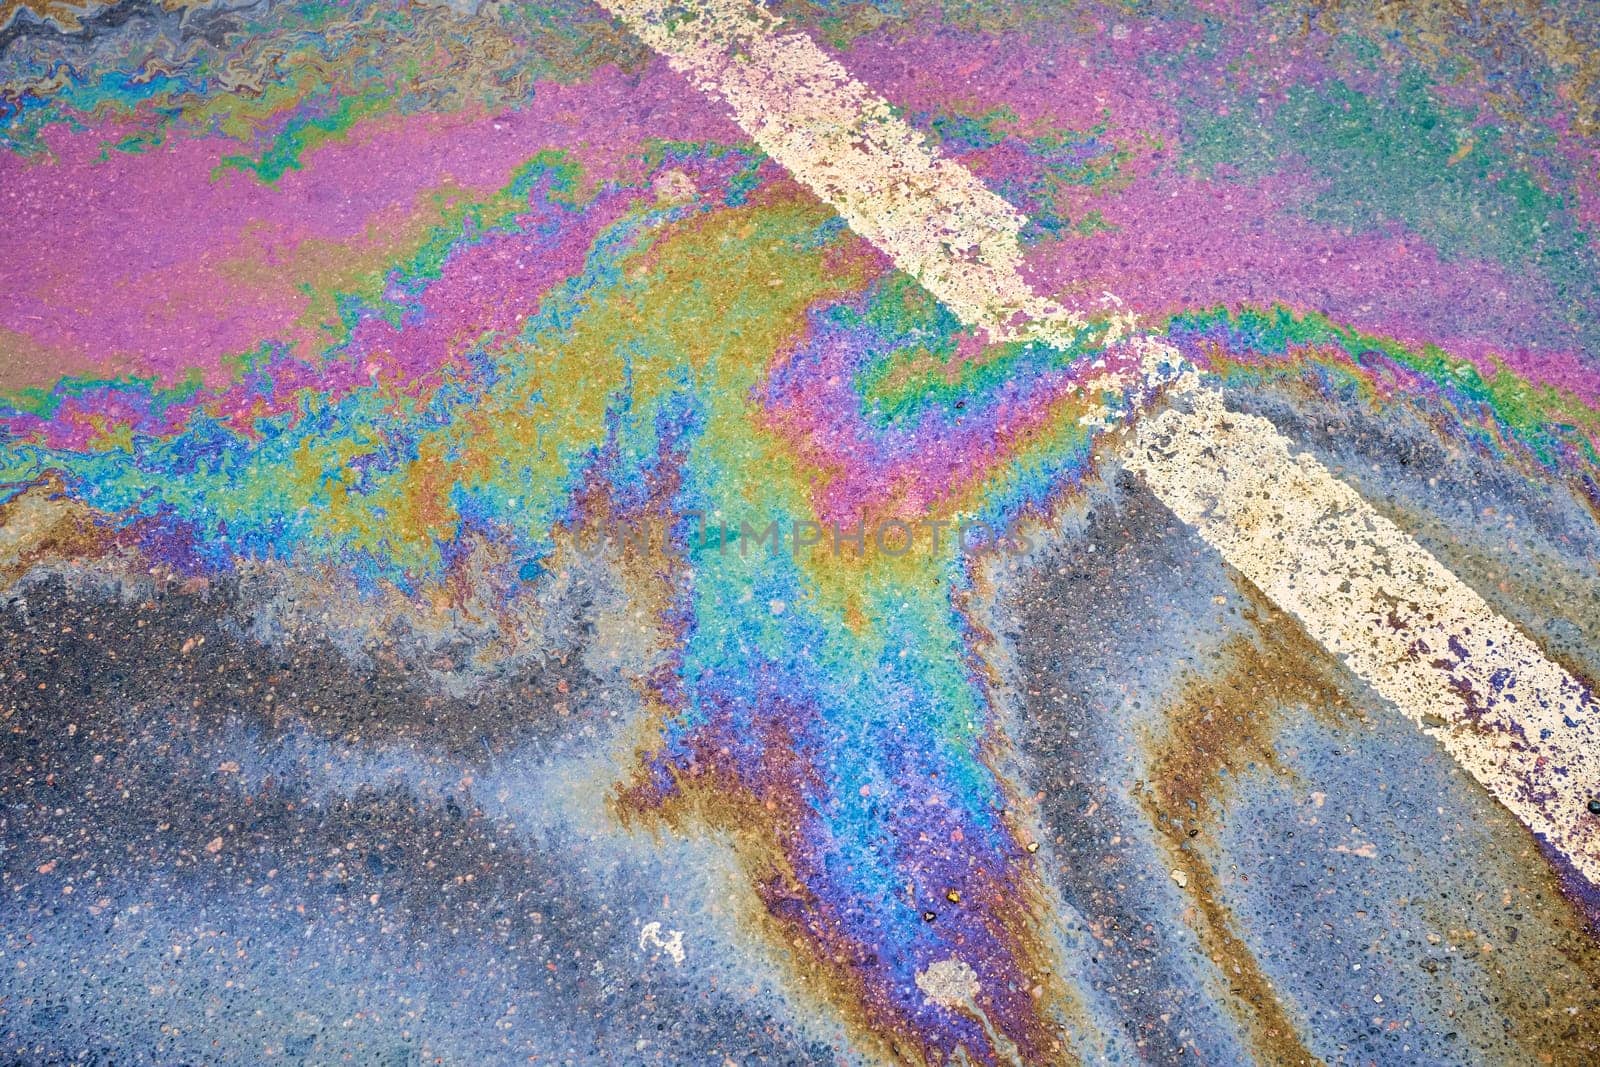 Oil spill on wet asphalt, parking lot with dividing lines. Highlighting environmental challenges related to water pollution